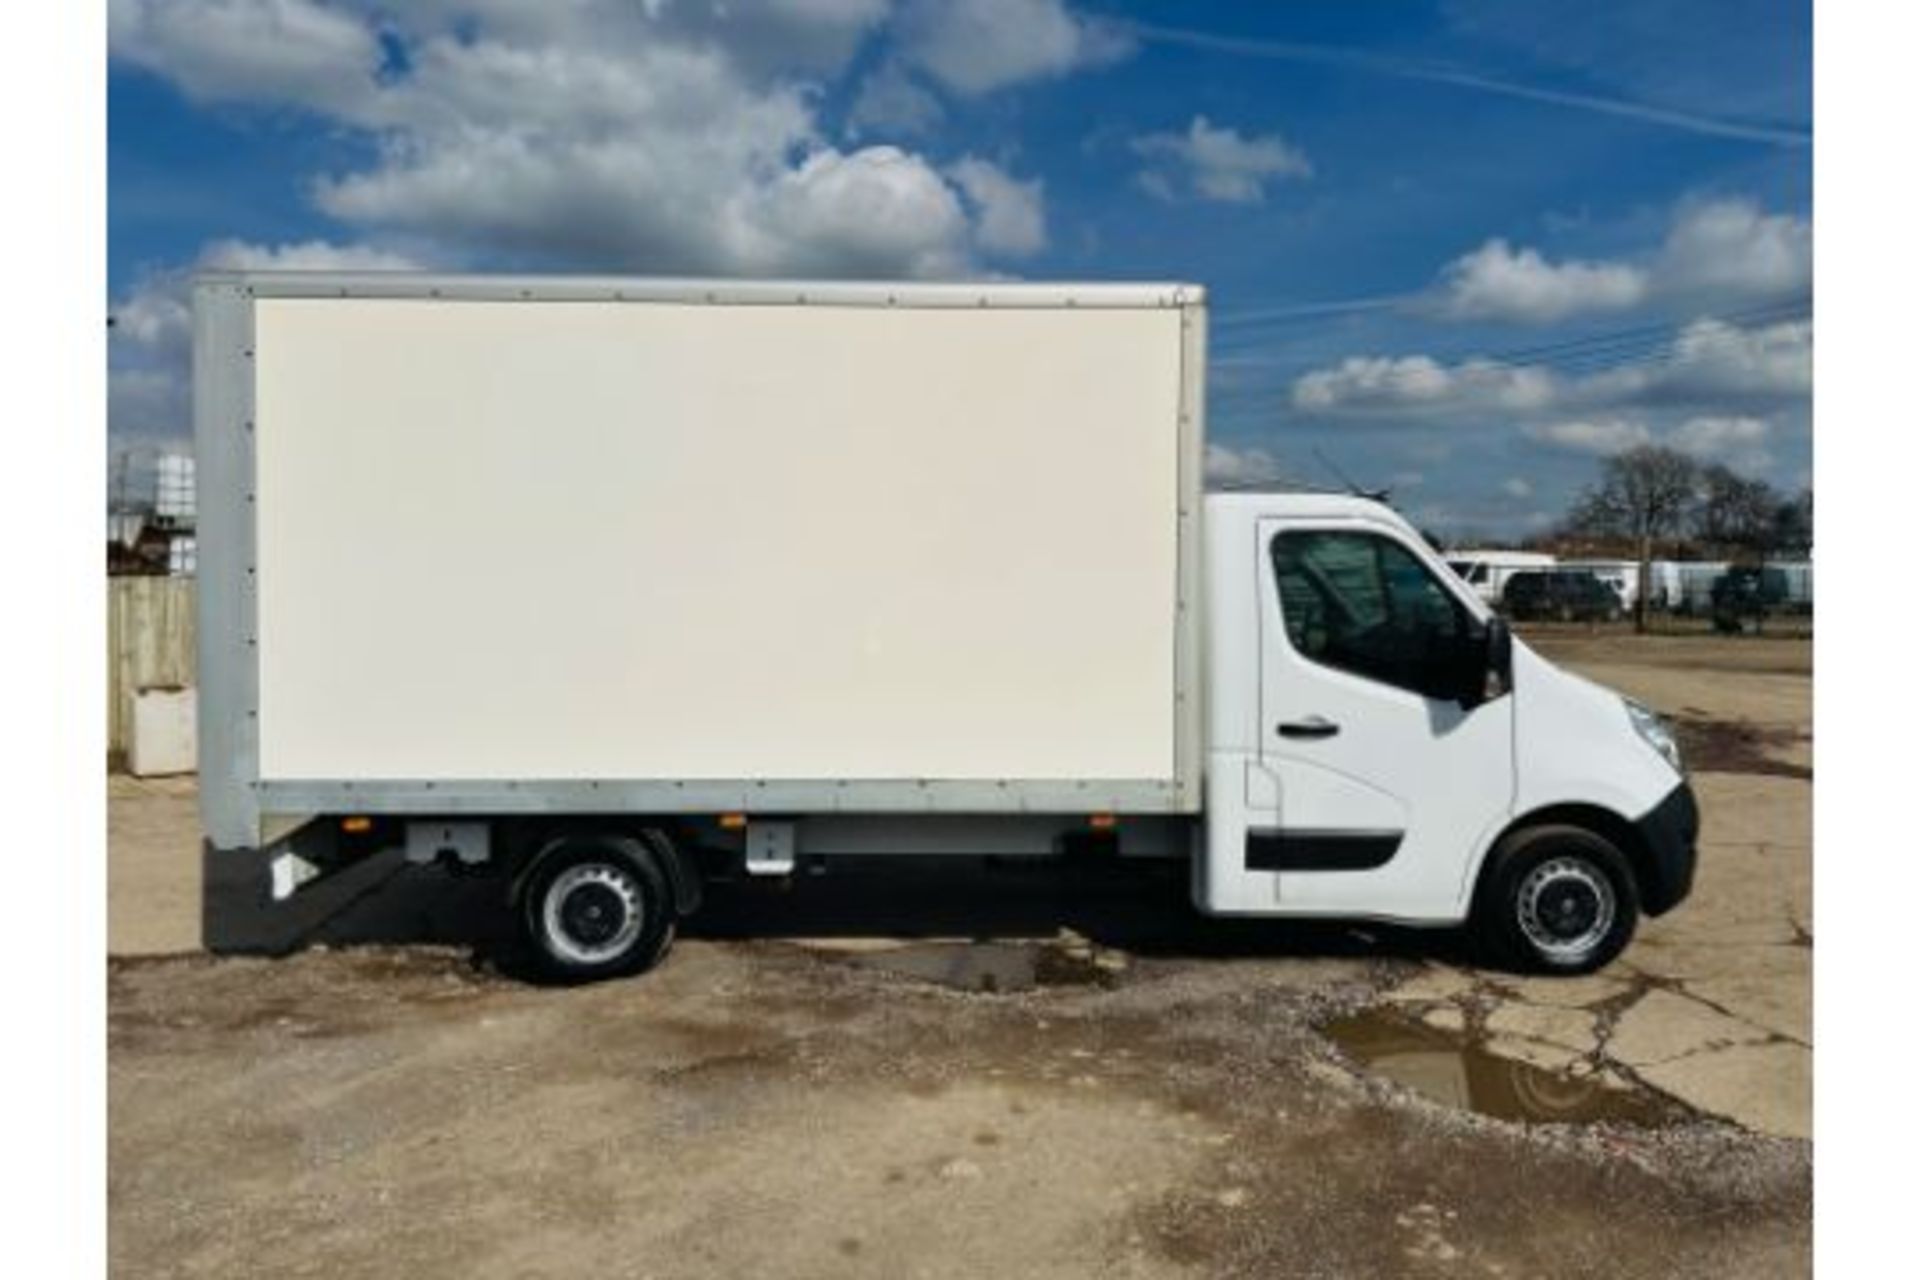 Reserve Met -RENAULT MASTER 2.3DCI (130) Business Edition Lwb Box Van With Electric Tail Lift 68 Reg - Image 10 of 27